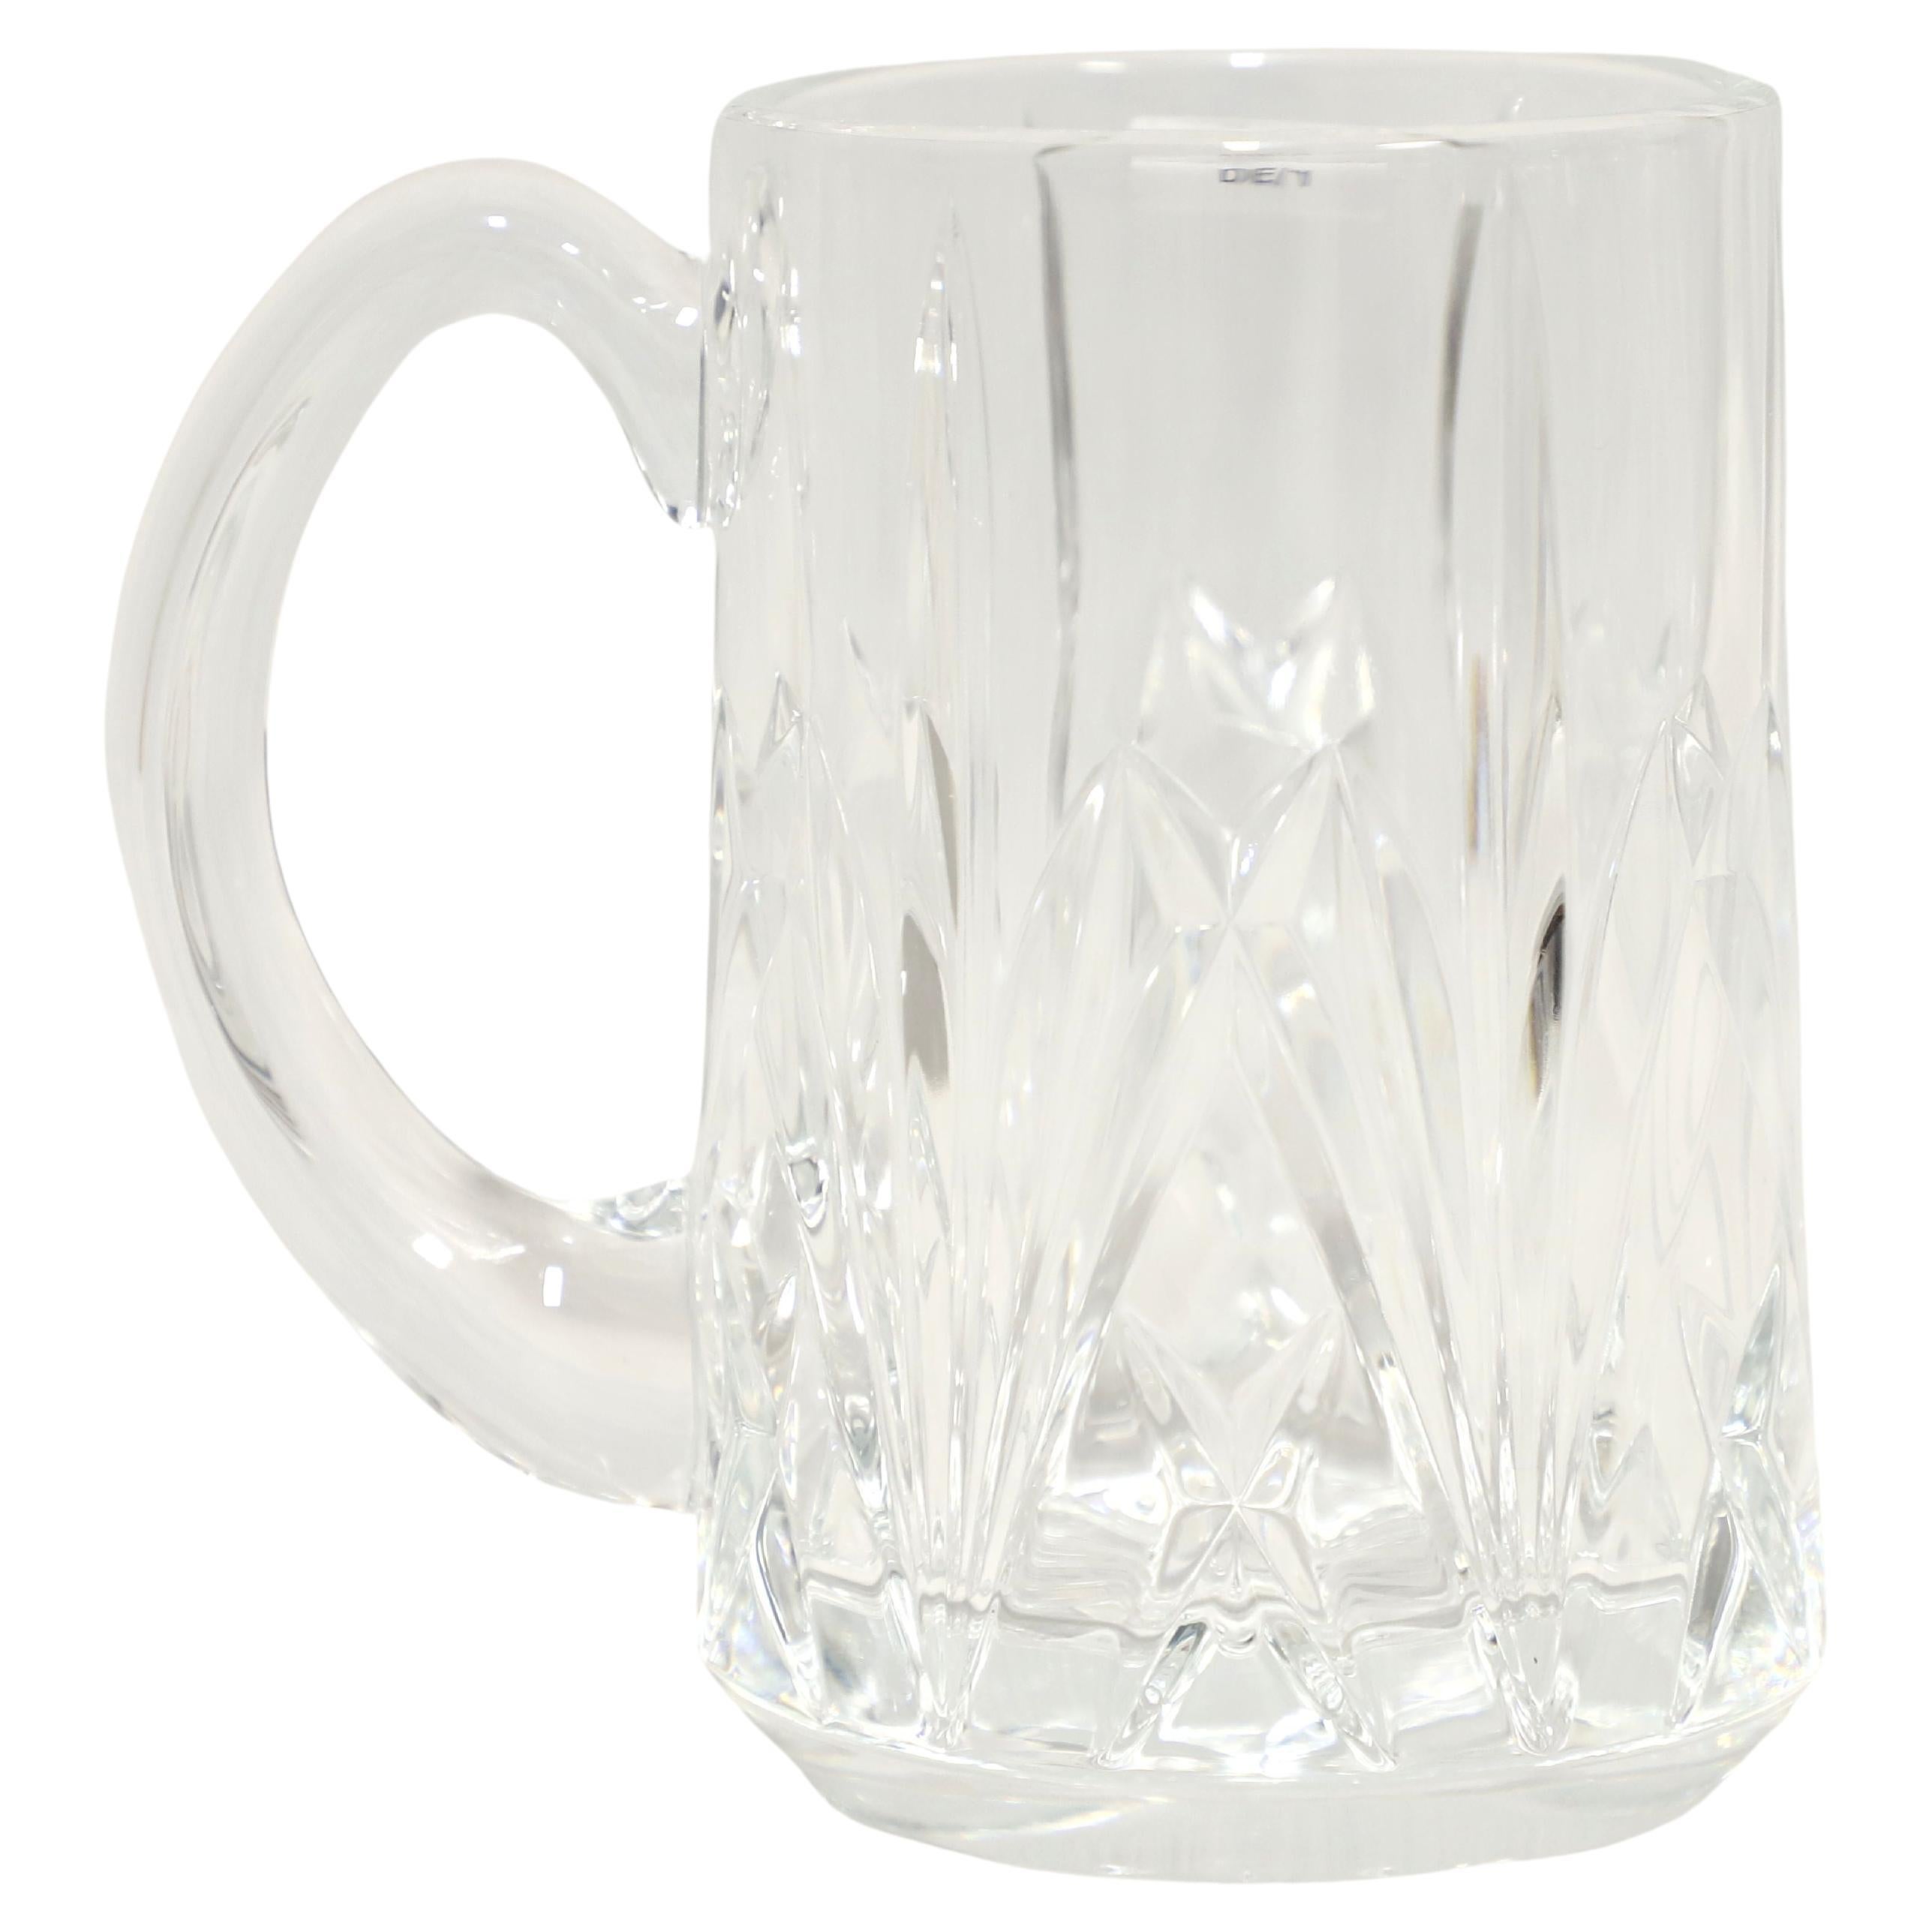 https://a.1stdibscdn.com/waterford-marquis-crystal-germany-6-brookside-beerstein-a-new-in-open-box-for-sale/f_60252/f_356368421691611498103/f_35636842_1691611499297_bg_processed.jpg